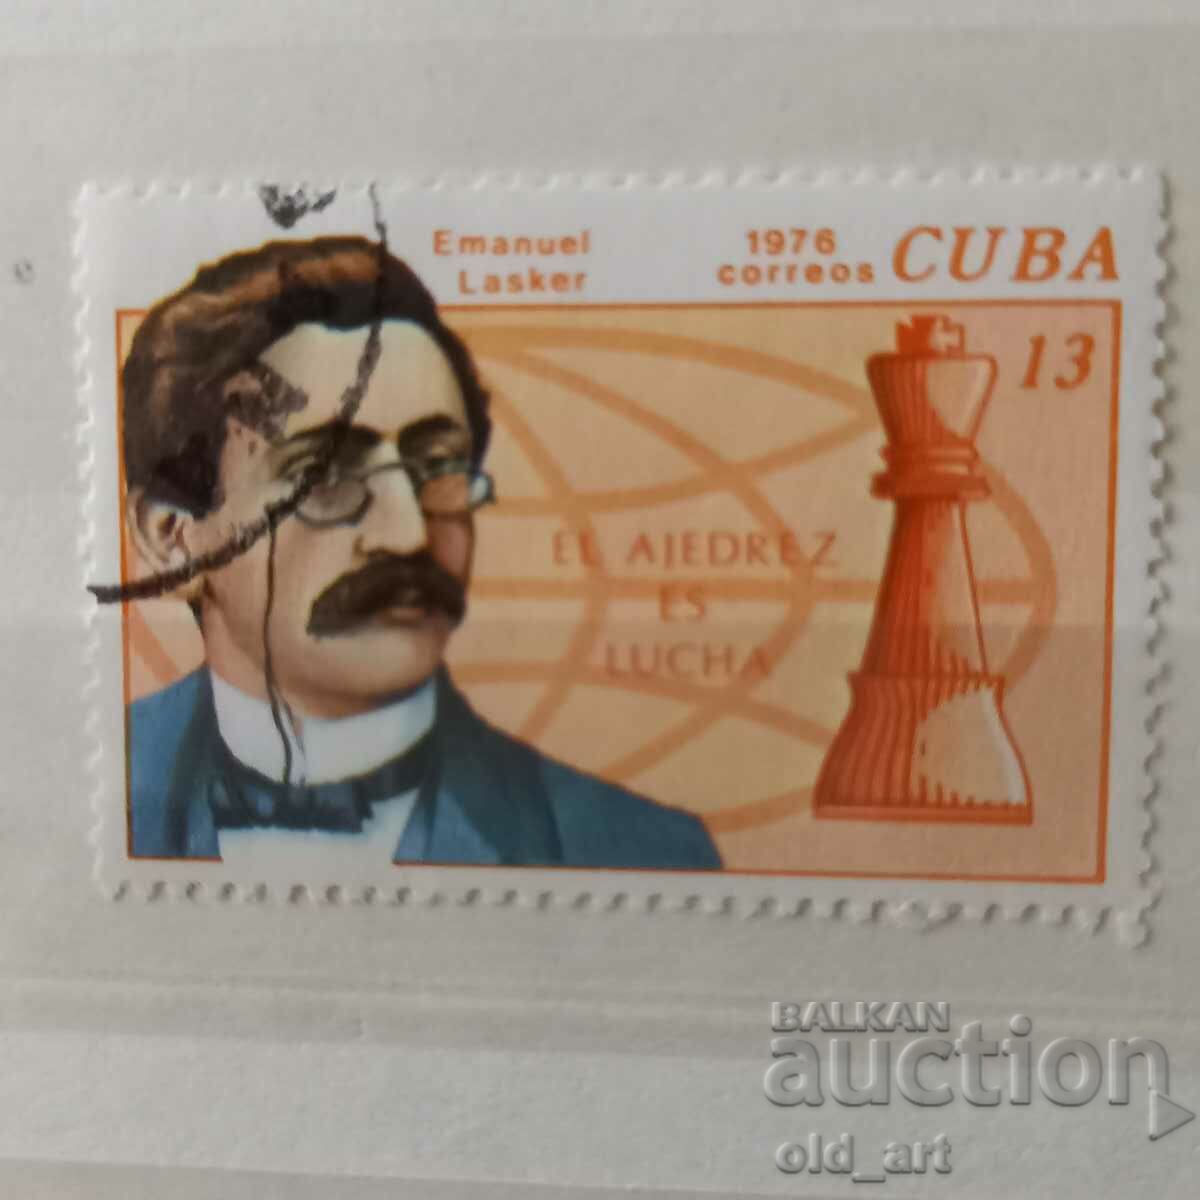 Postage stamp - Cuba, sports, chess